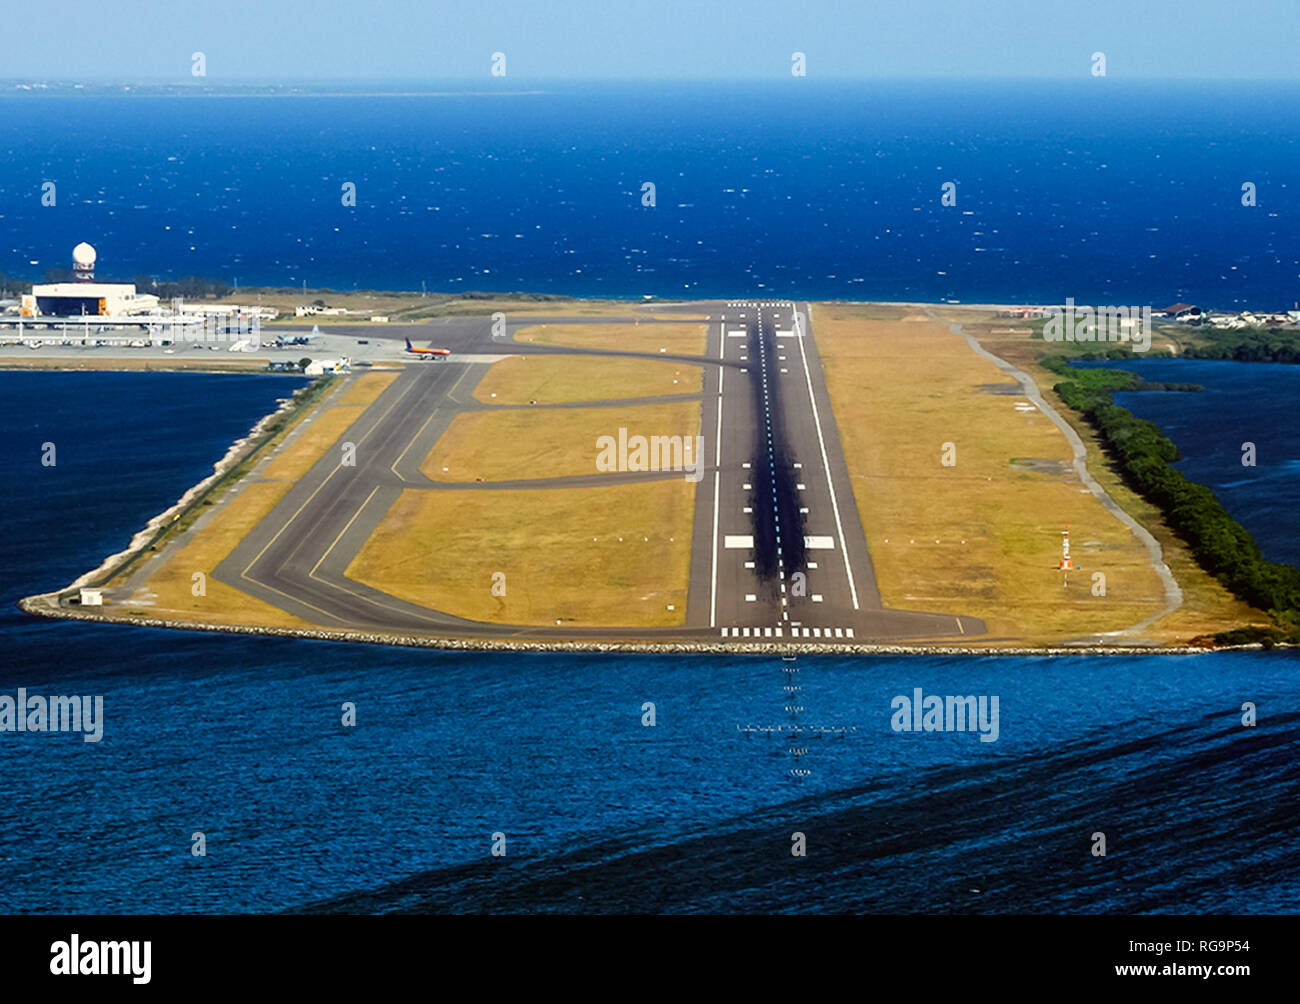 Airport on the island, landing strip on the island. Stock Photo